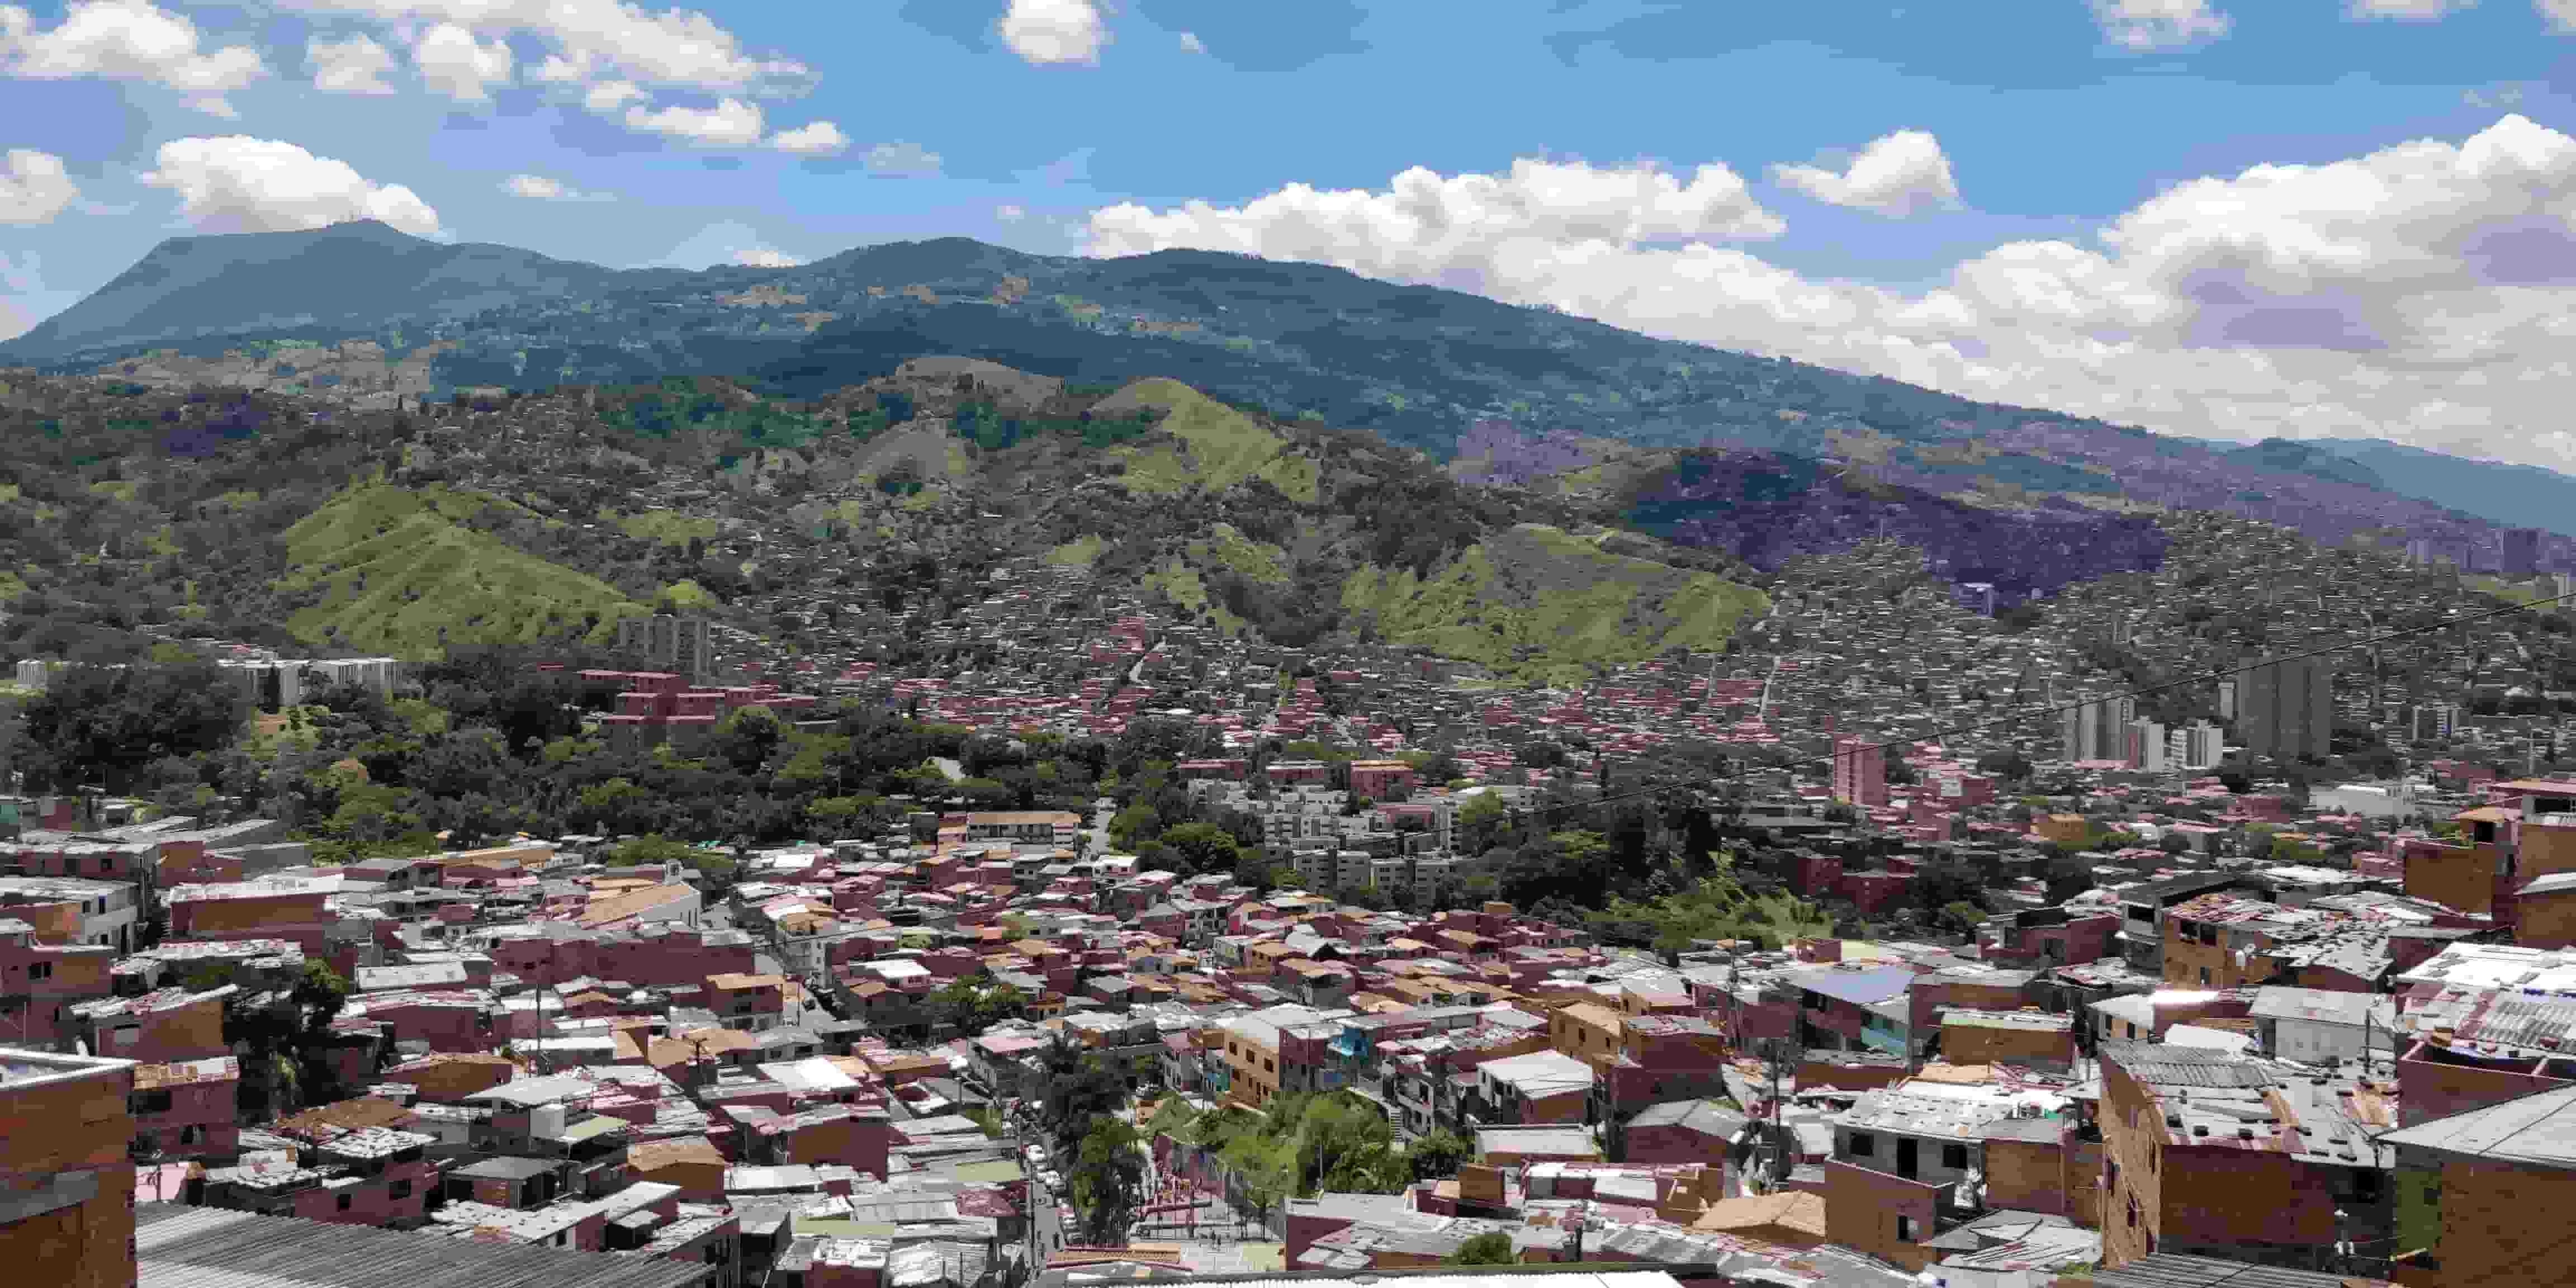 Incredible view of San Javier - comuna 13 barrio from the top